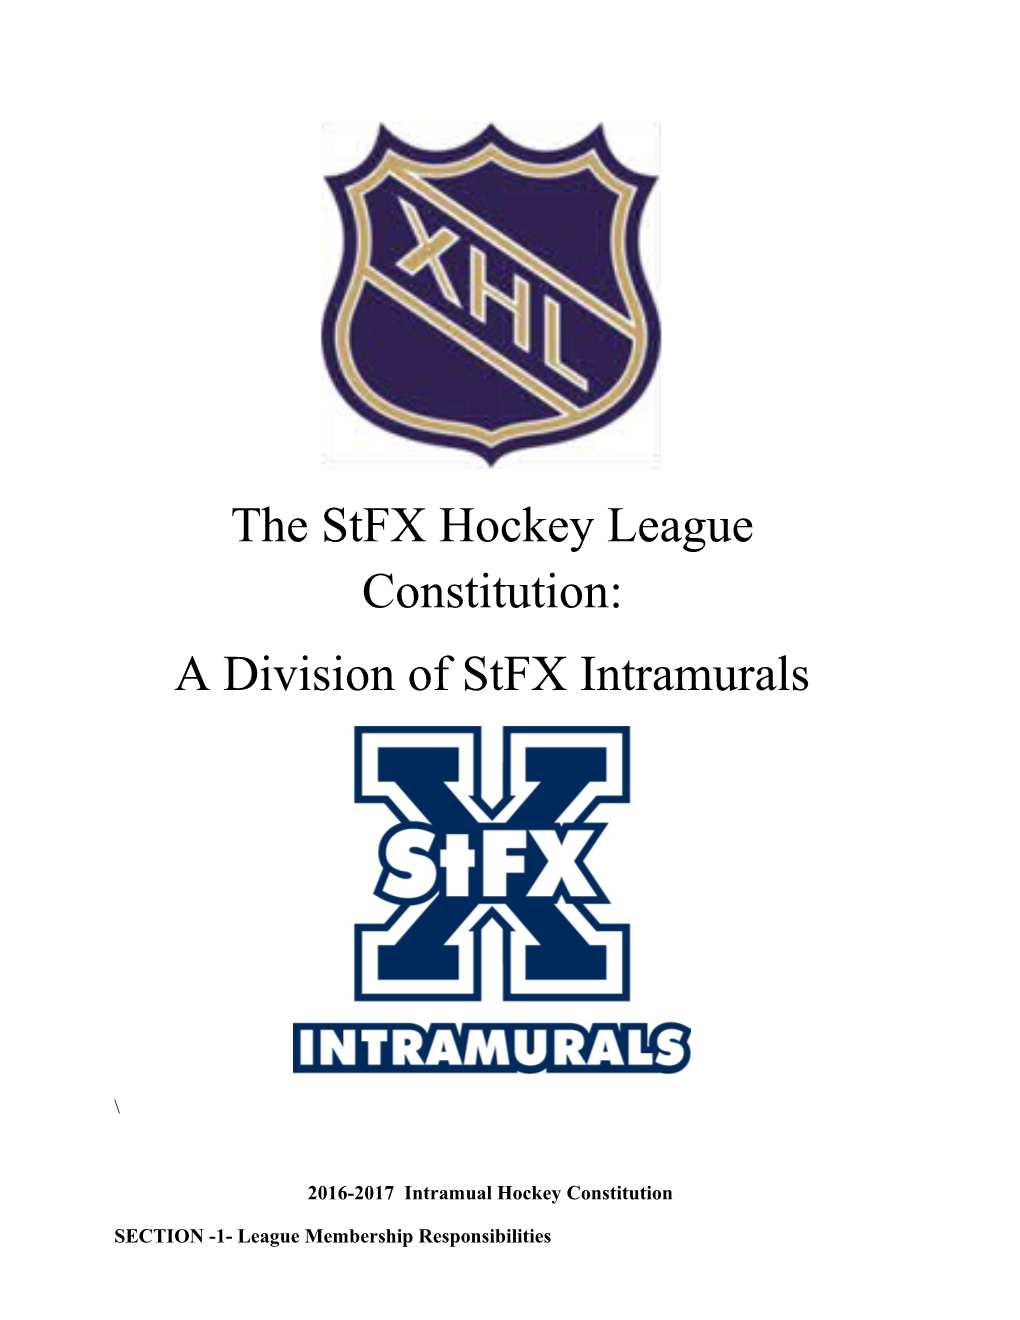 The Stfx Hockey League Constitution